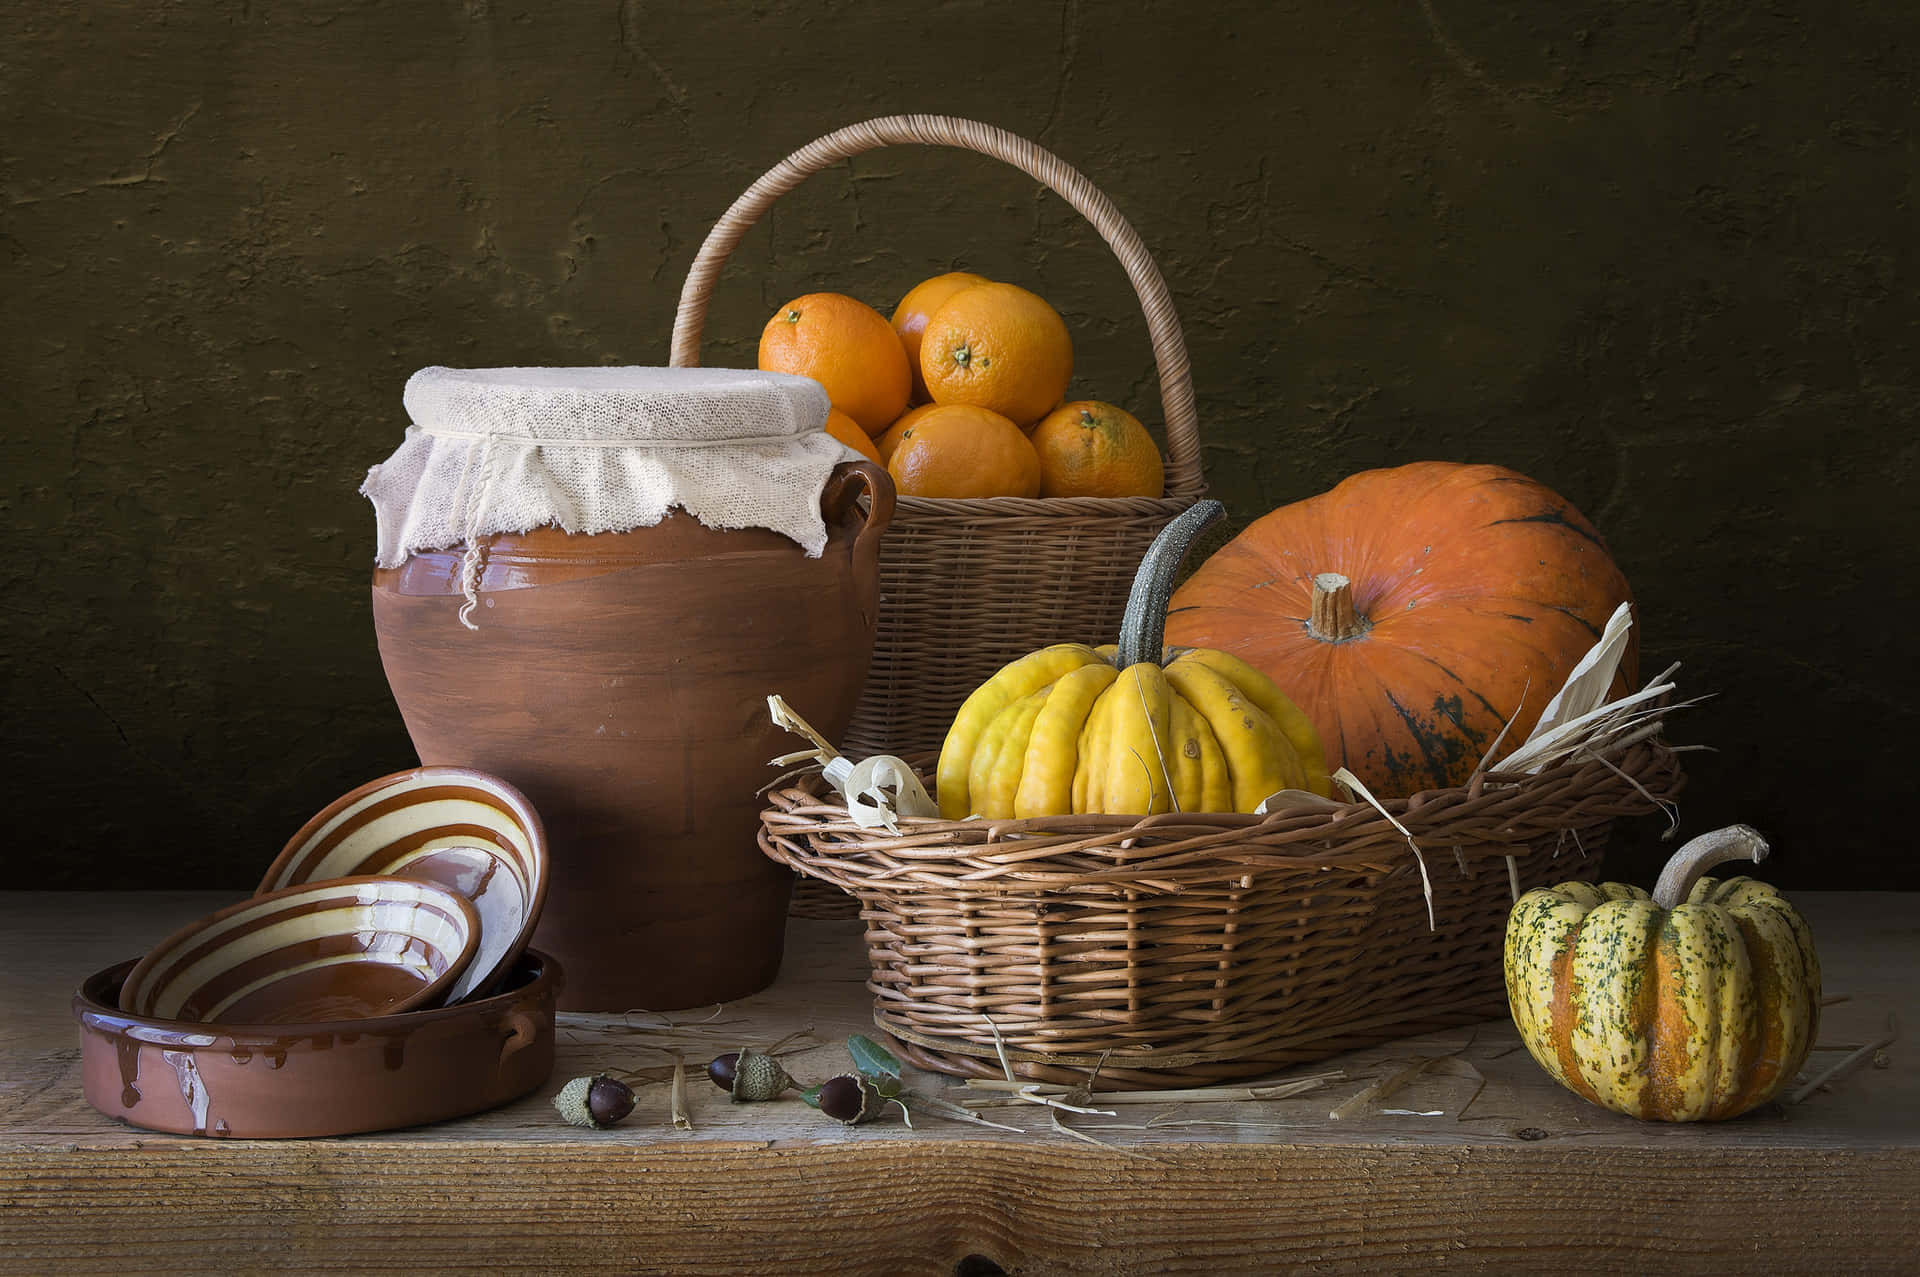 Autumn Harvest: Fall Pumpkins and Leaves